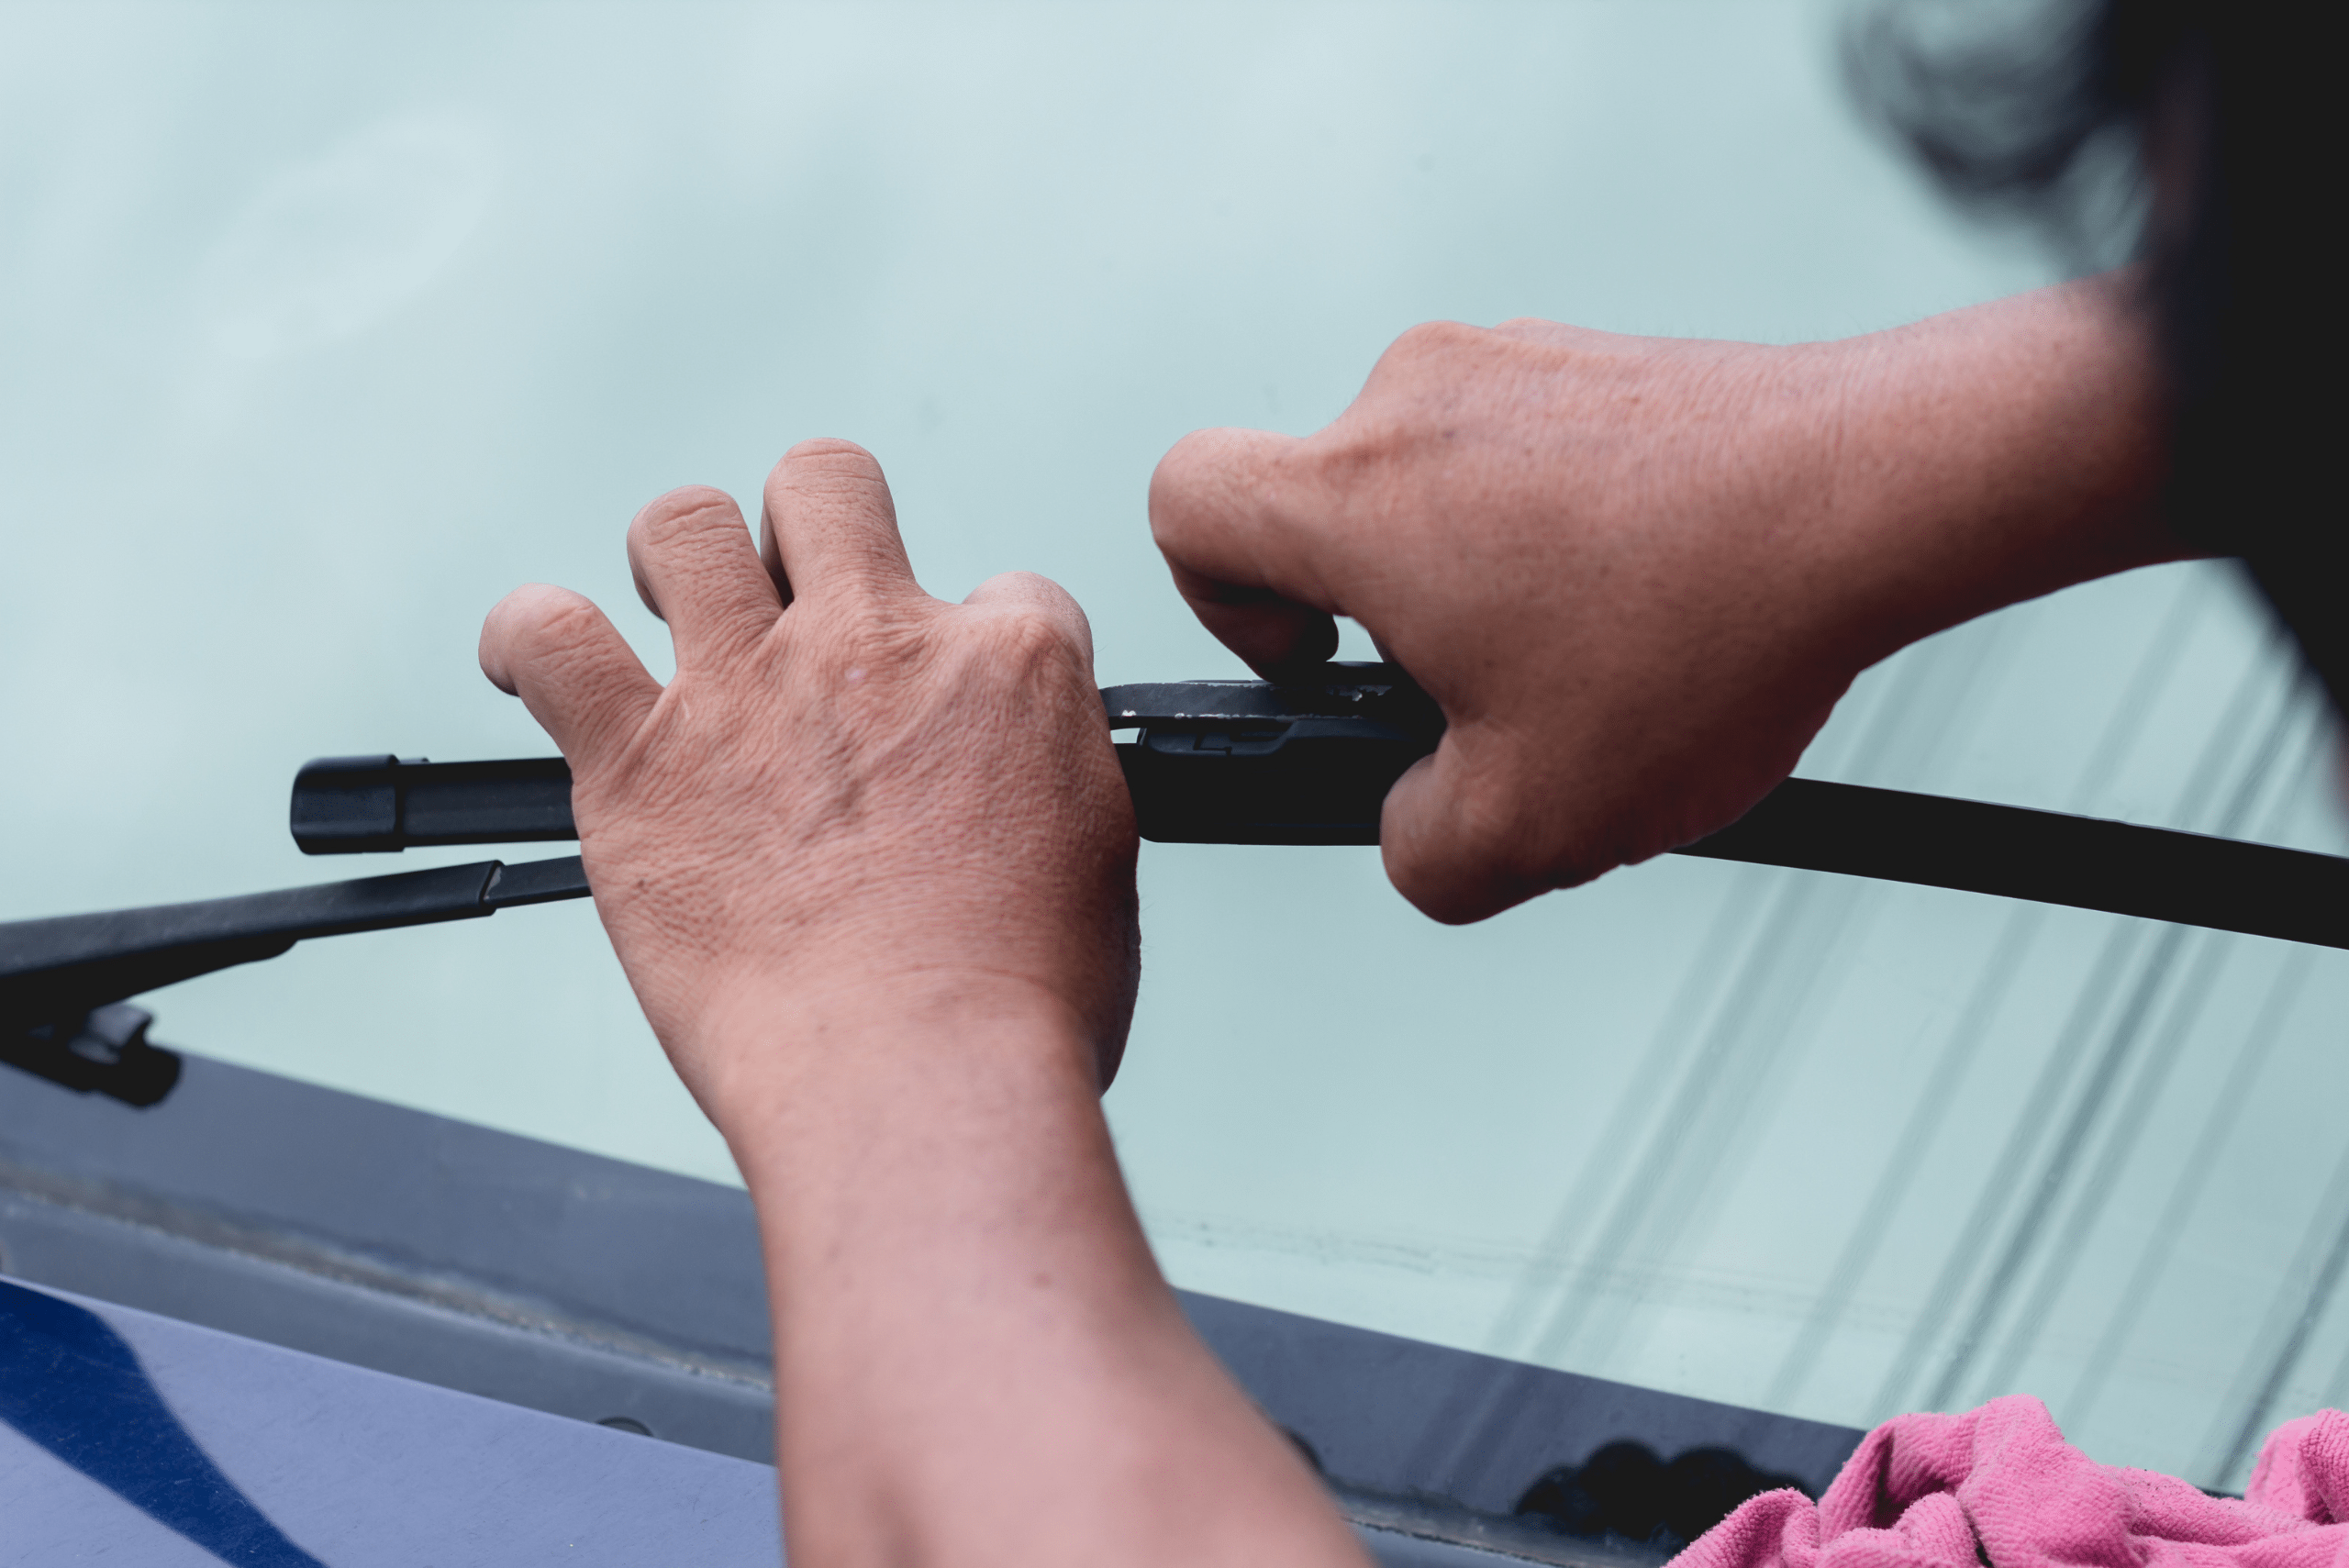 Closeup of a person's hands unhooking the wiper blade from the arm.